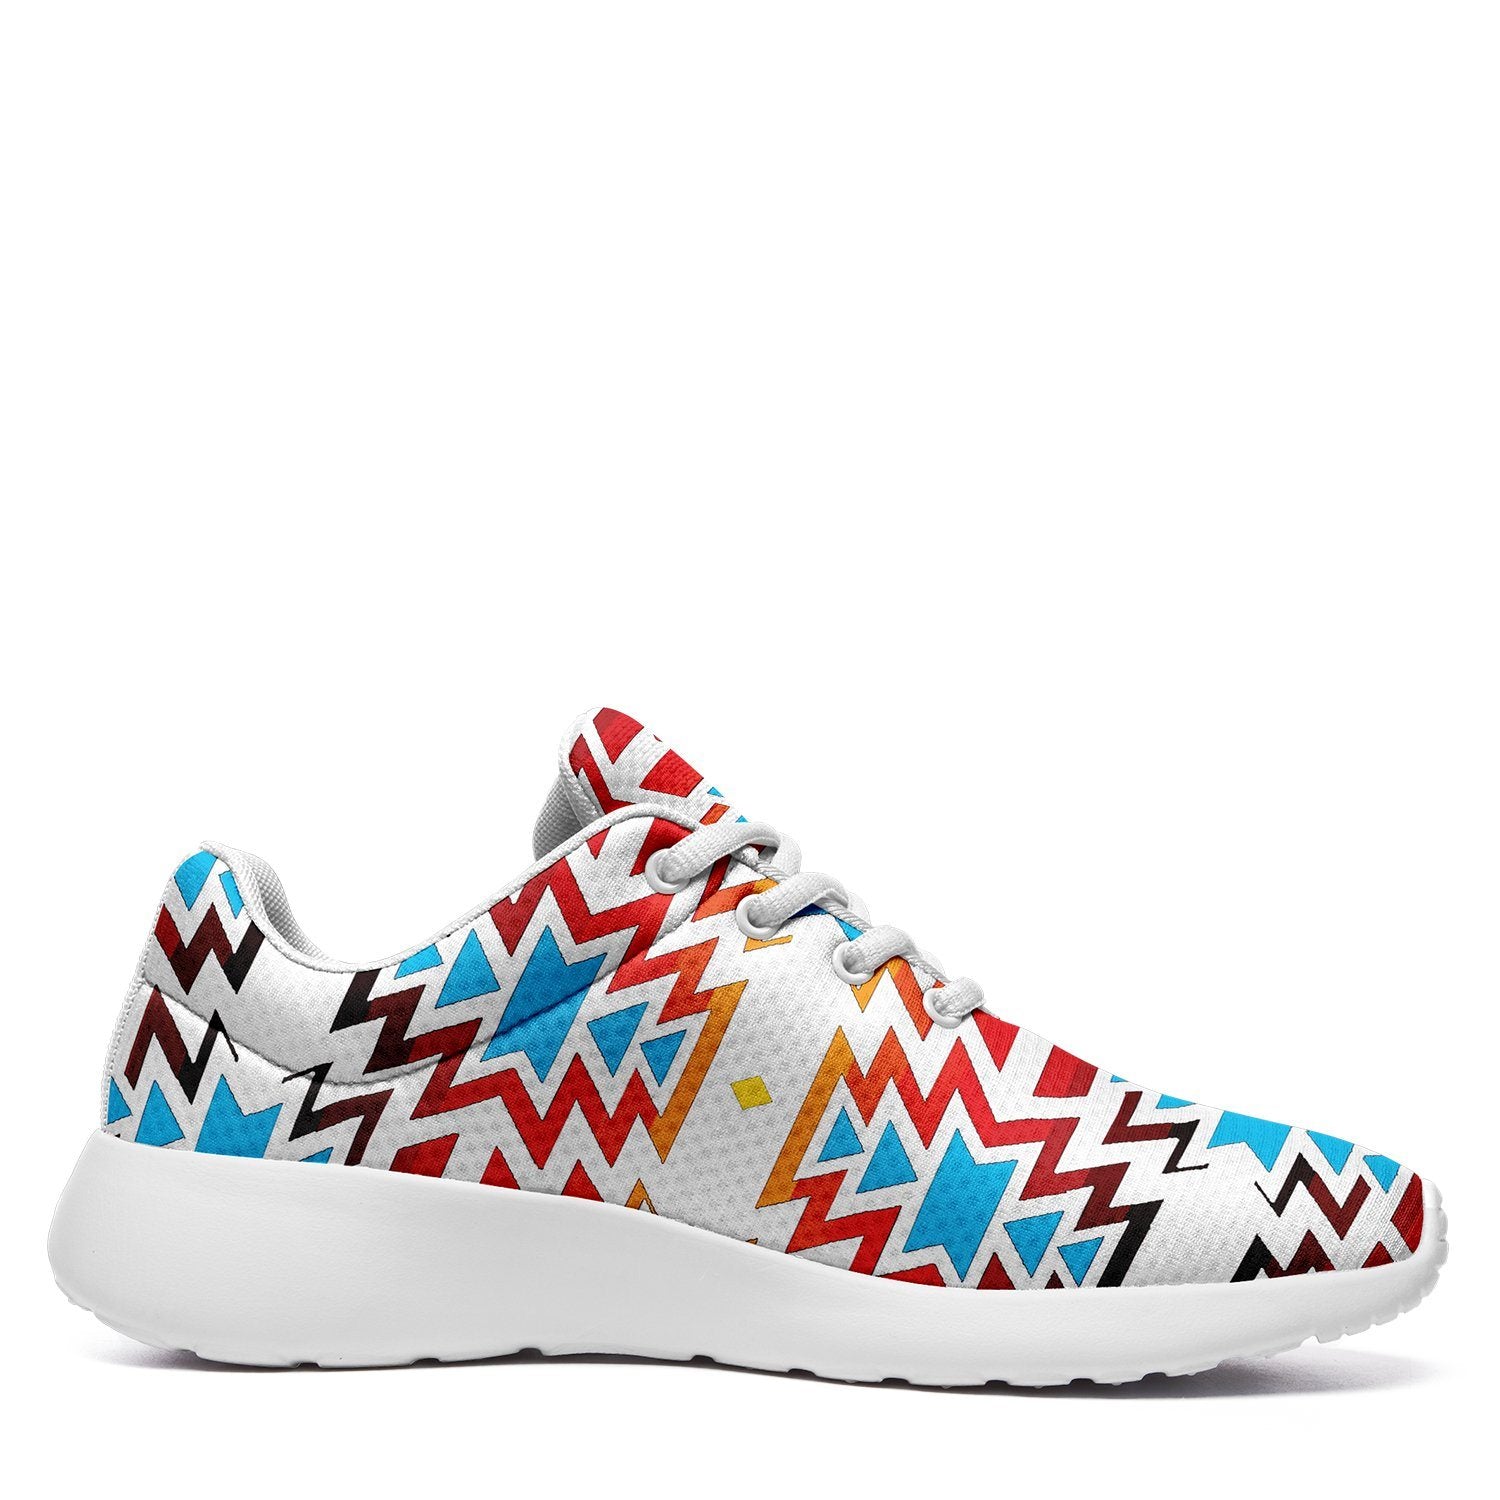 Fire Colors and Sky Ikkaayi Sport Sneakers 49 Dzine 